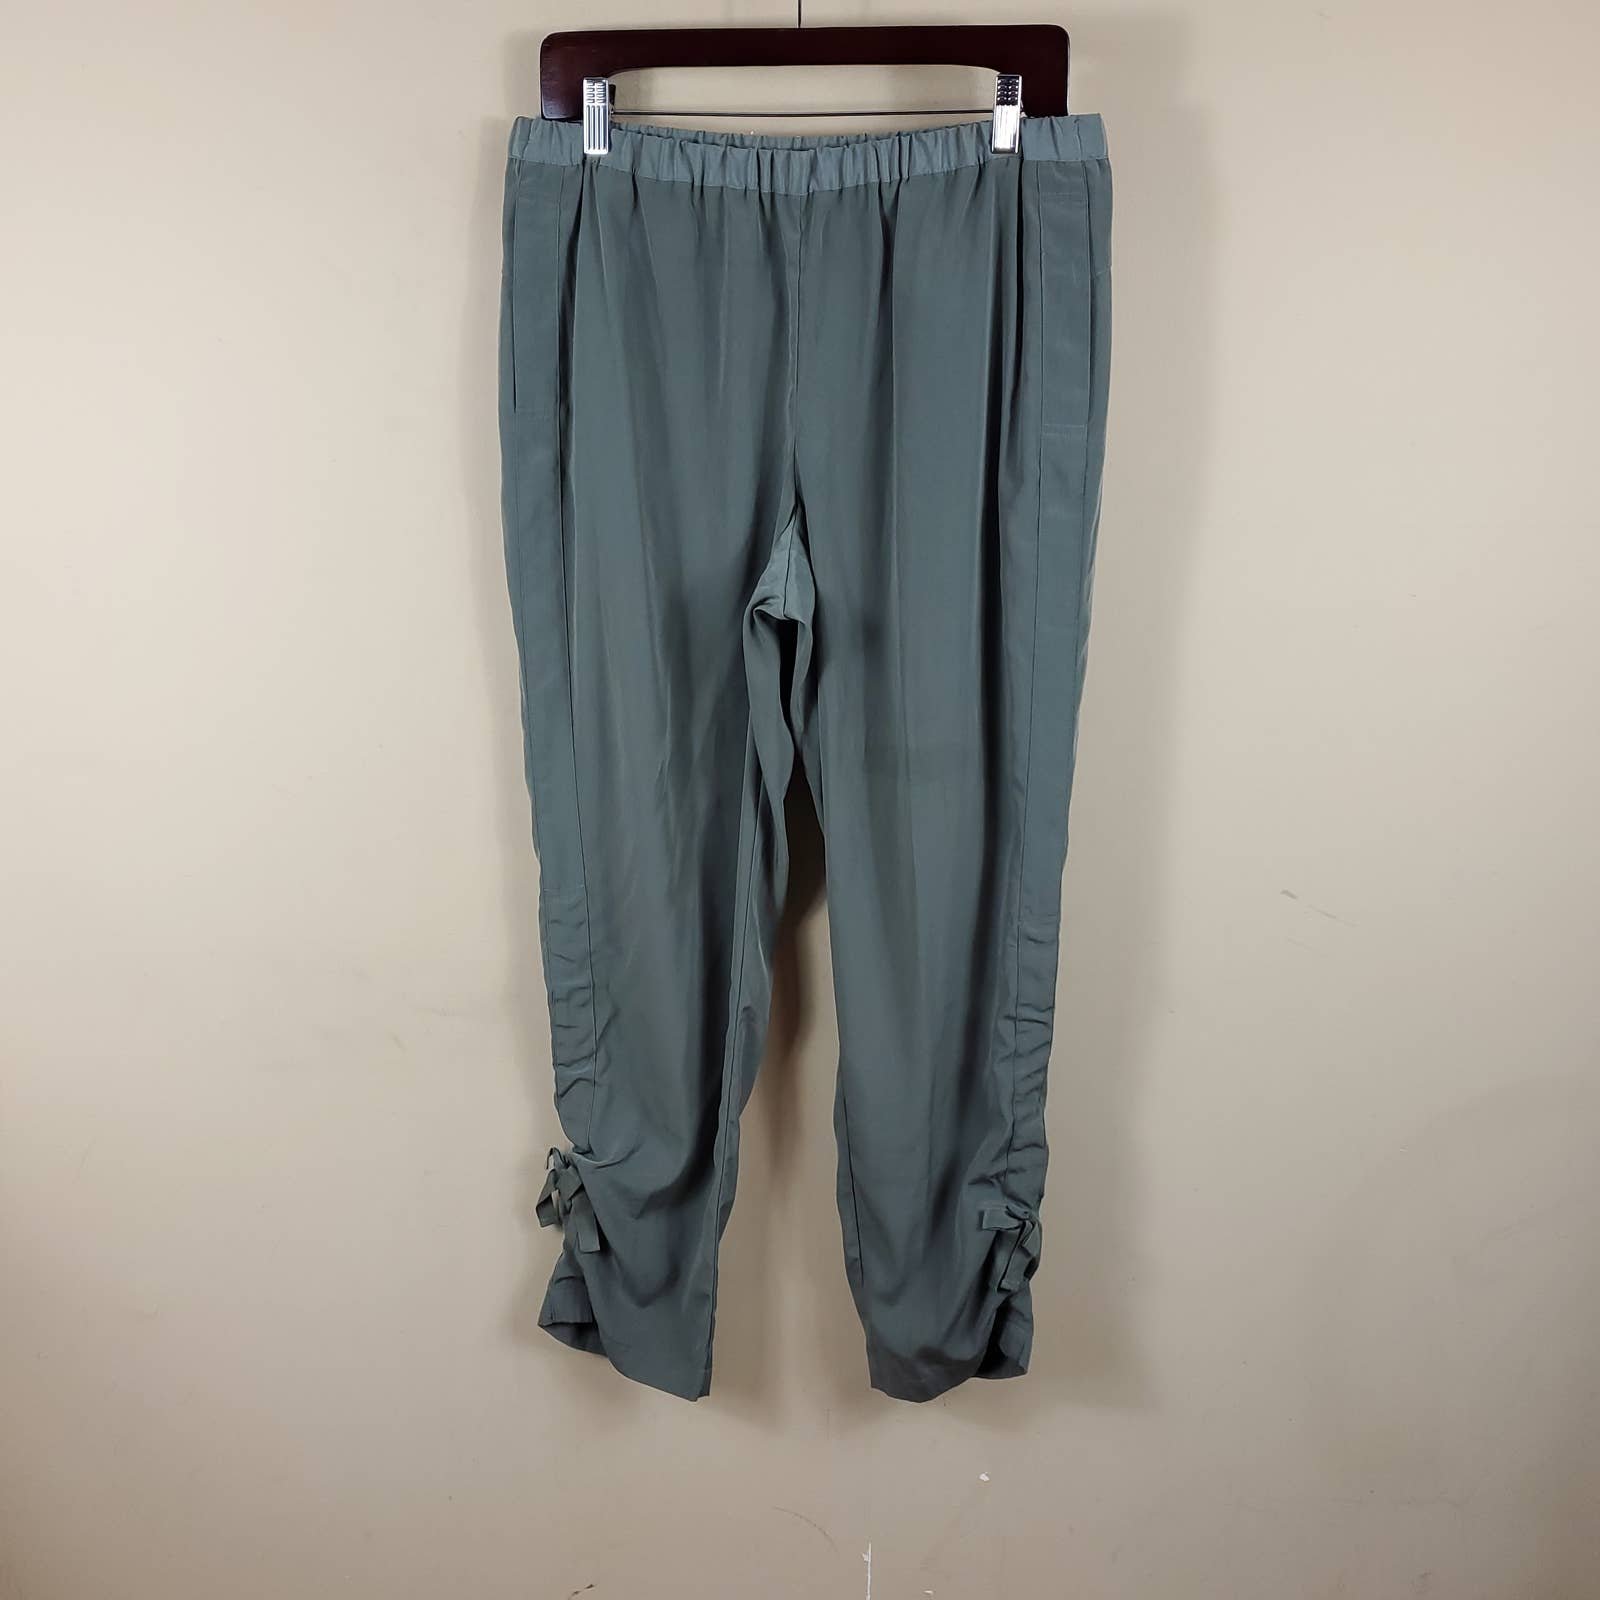 Beautiful Chicos Green Pull-on Tab Pants Size M fIpcCNxq1 Great